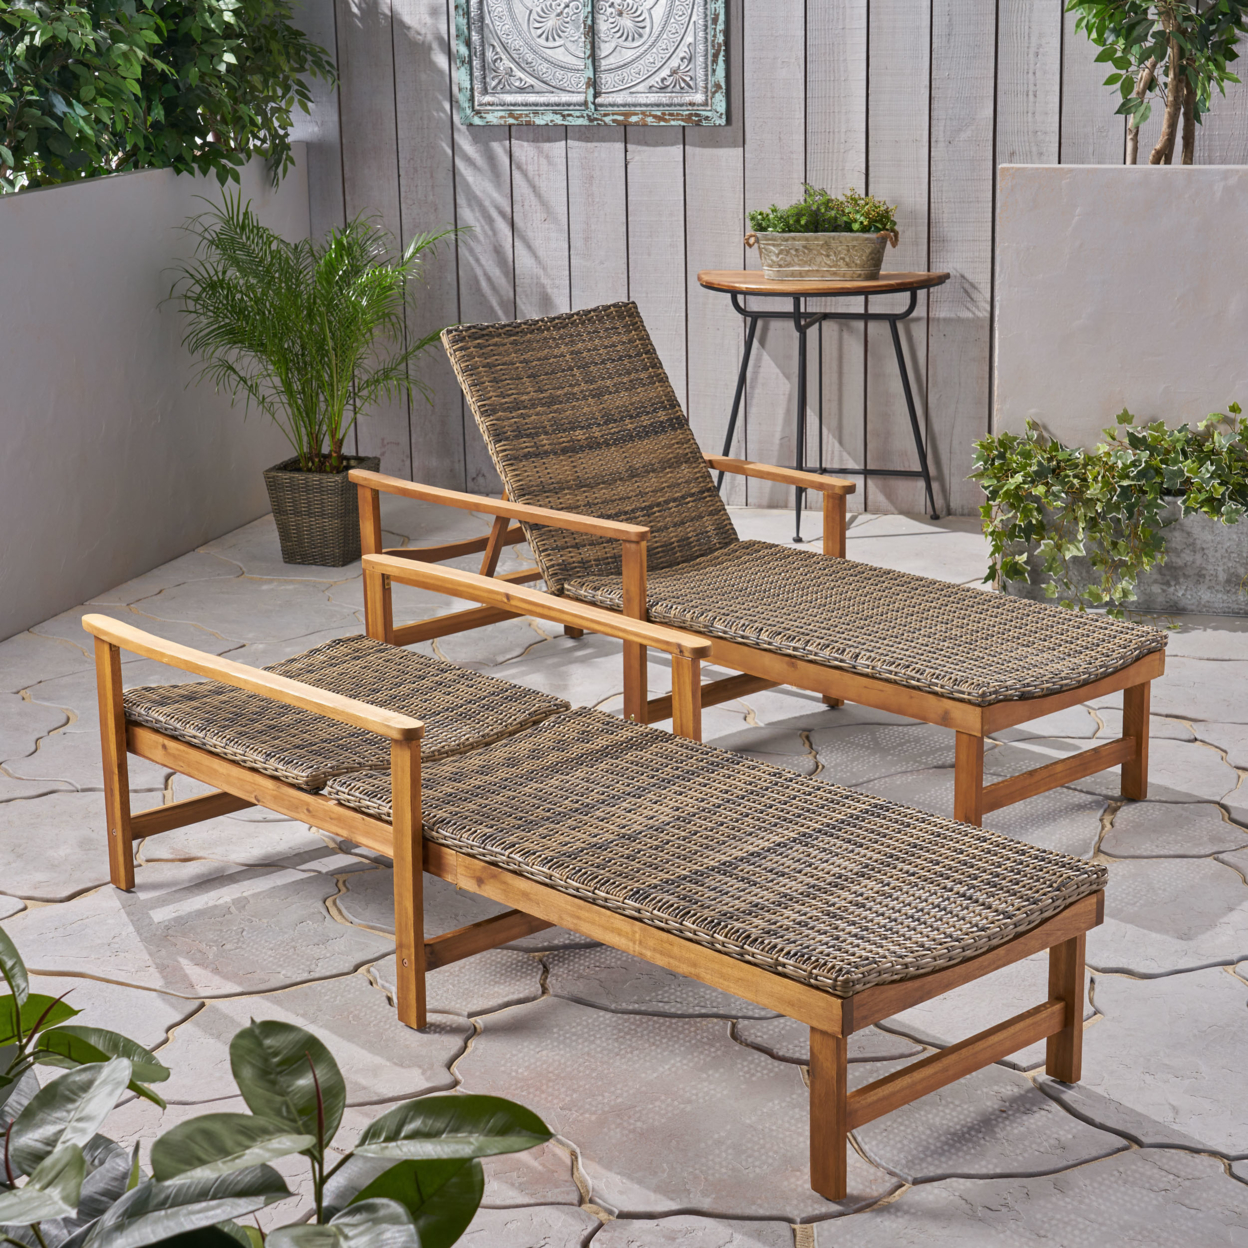 Kyle Outdoor Rustic Acacia Wood Chaise Lounge With Wicker Seat - Natural/Mocha, Set Of 2